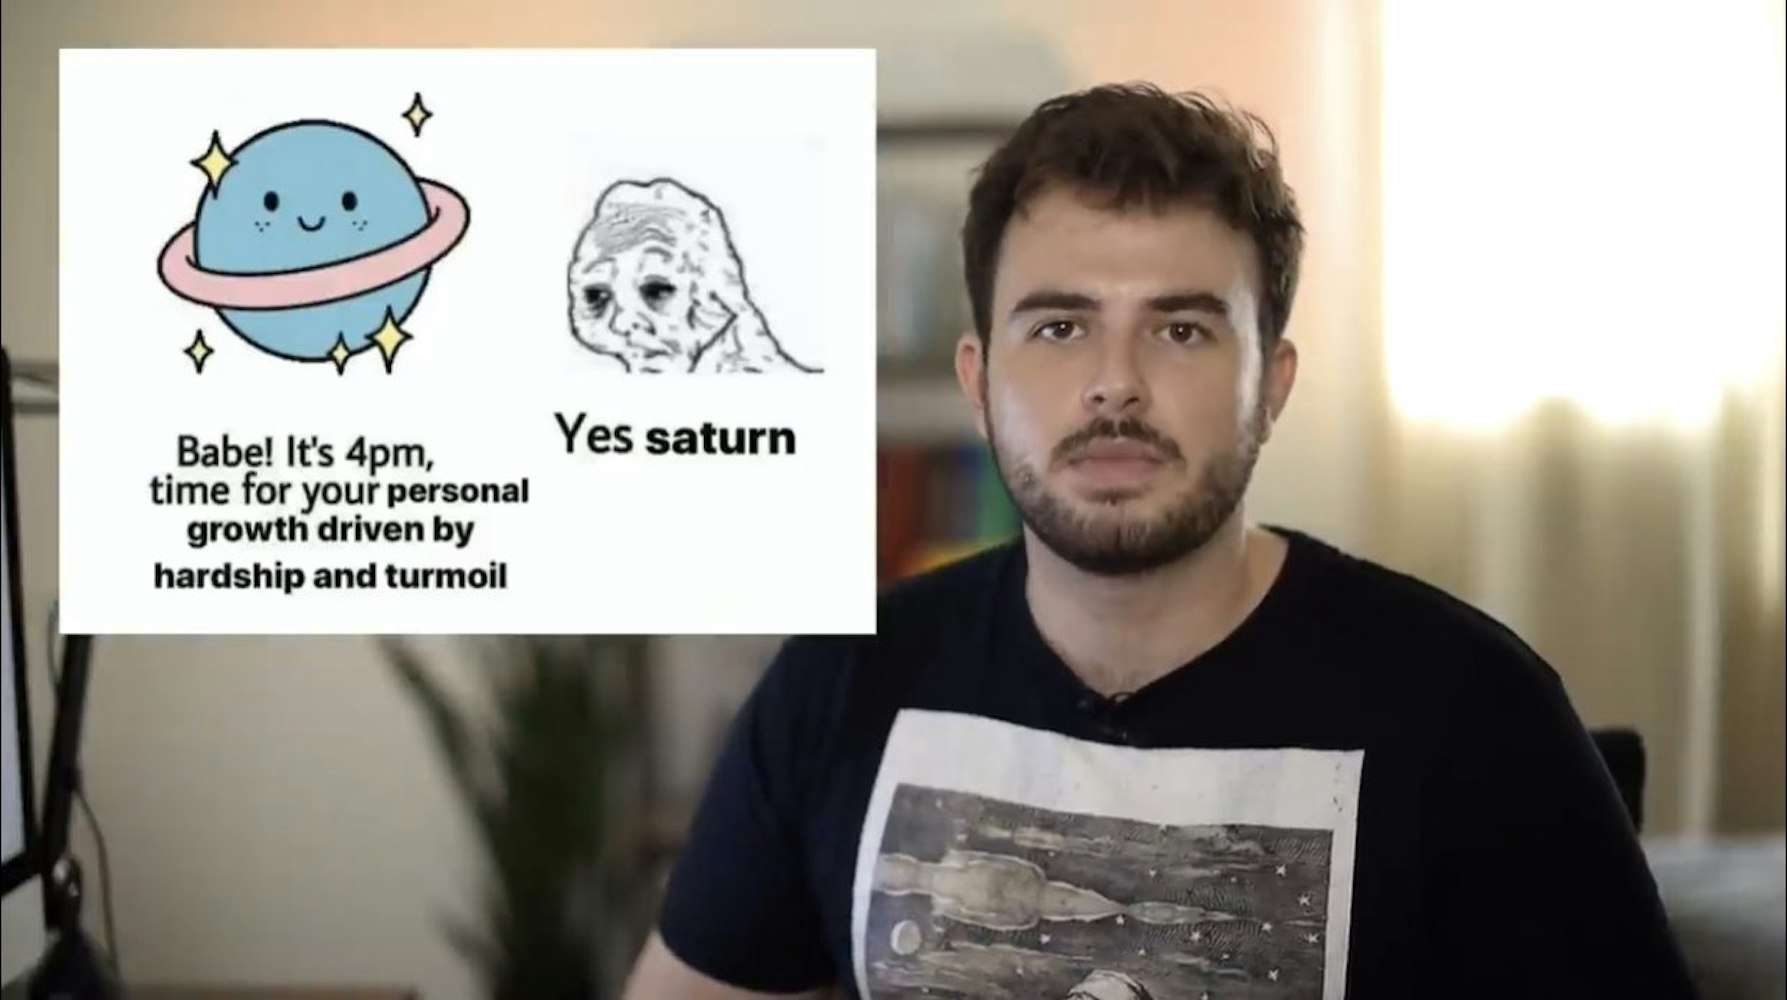 Cam hosts his YouTube show with a meme about Saturn's influence on personal growth